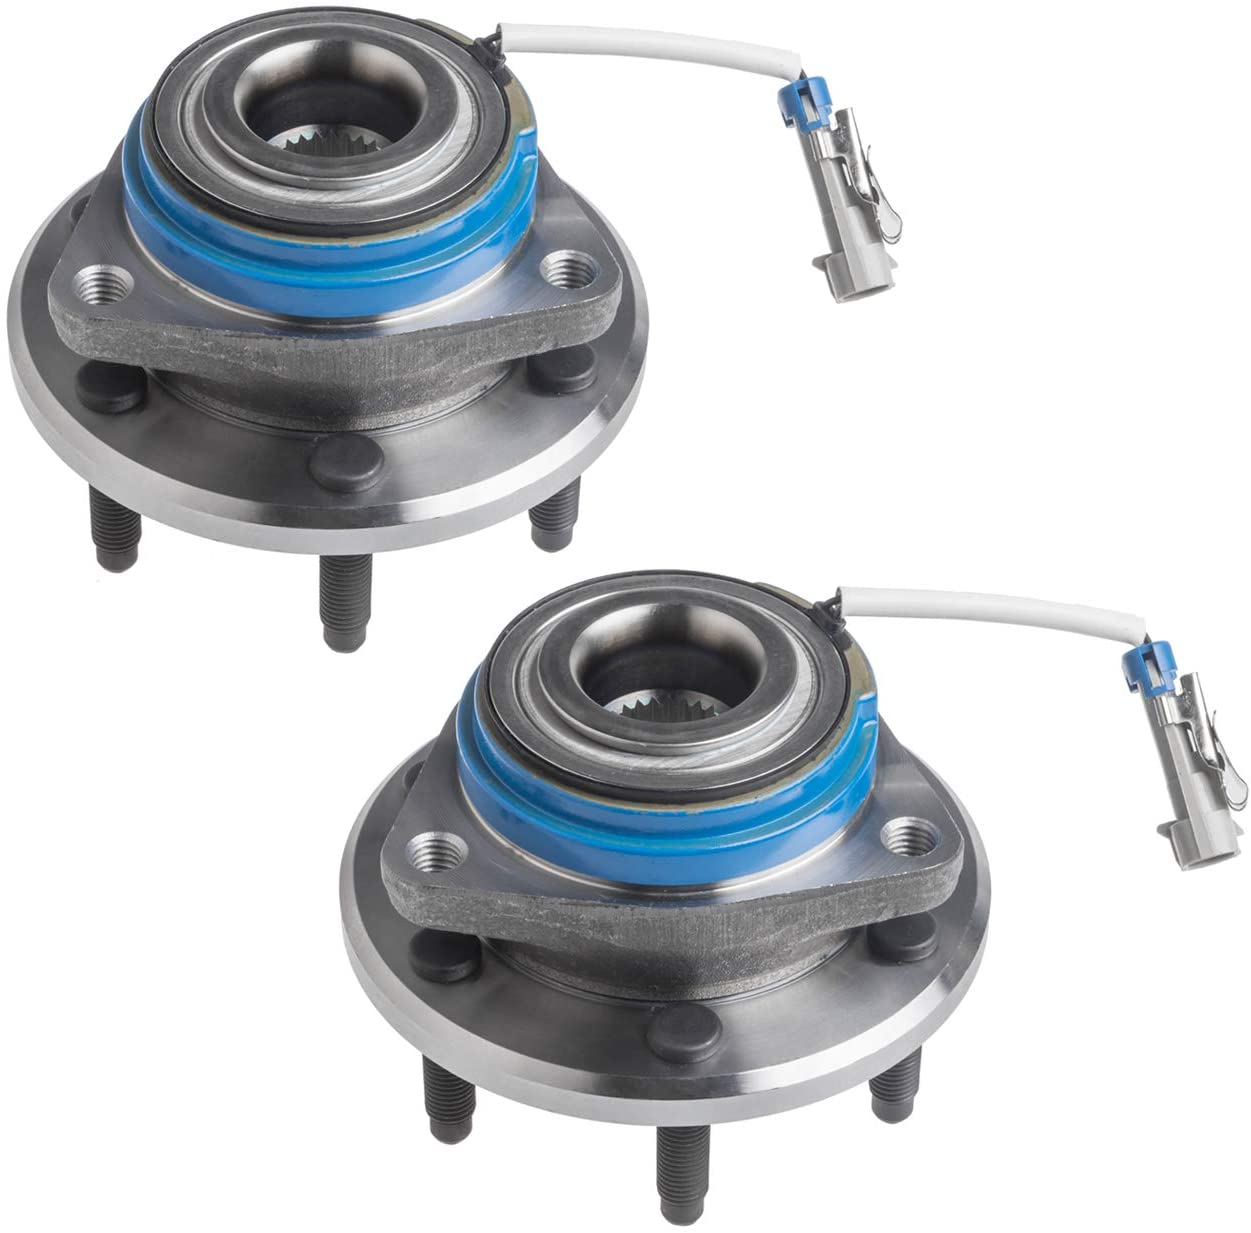 TUCAREST (6 Stud Hub) 512243 x2 (Pair) Rear Wheel Bearing and Hub Assembly Compatible With 2004-2007 Cadillac CTS (6.0L and 5.7L V8) 2004-2009 SRX 2005-2011 STS [W/ABS]